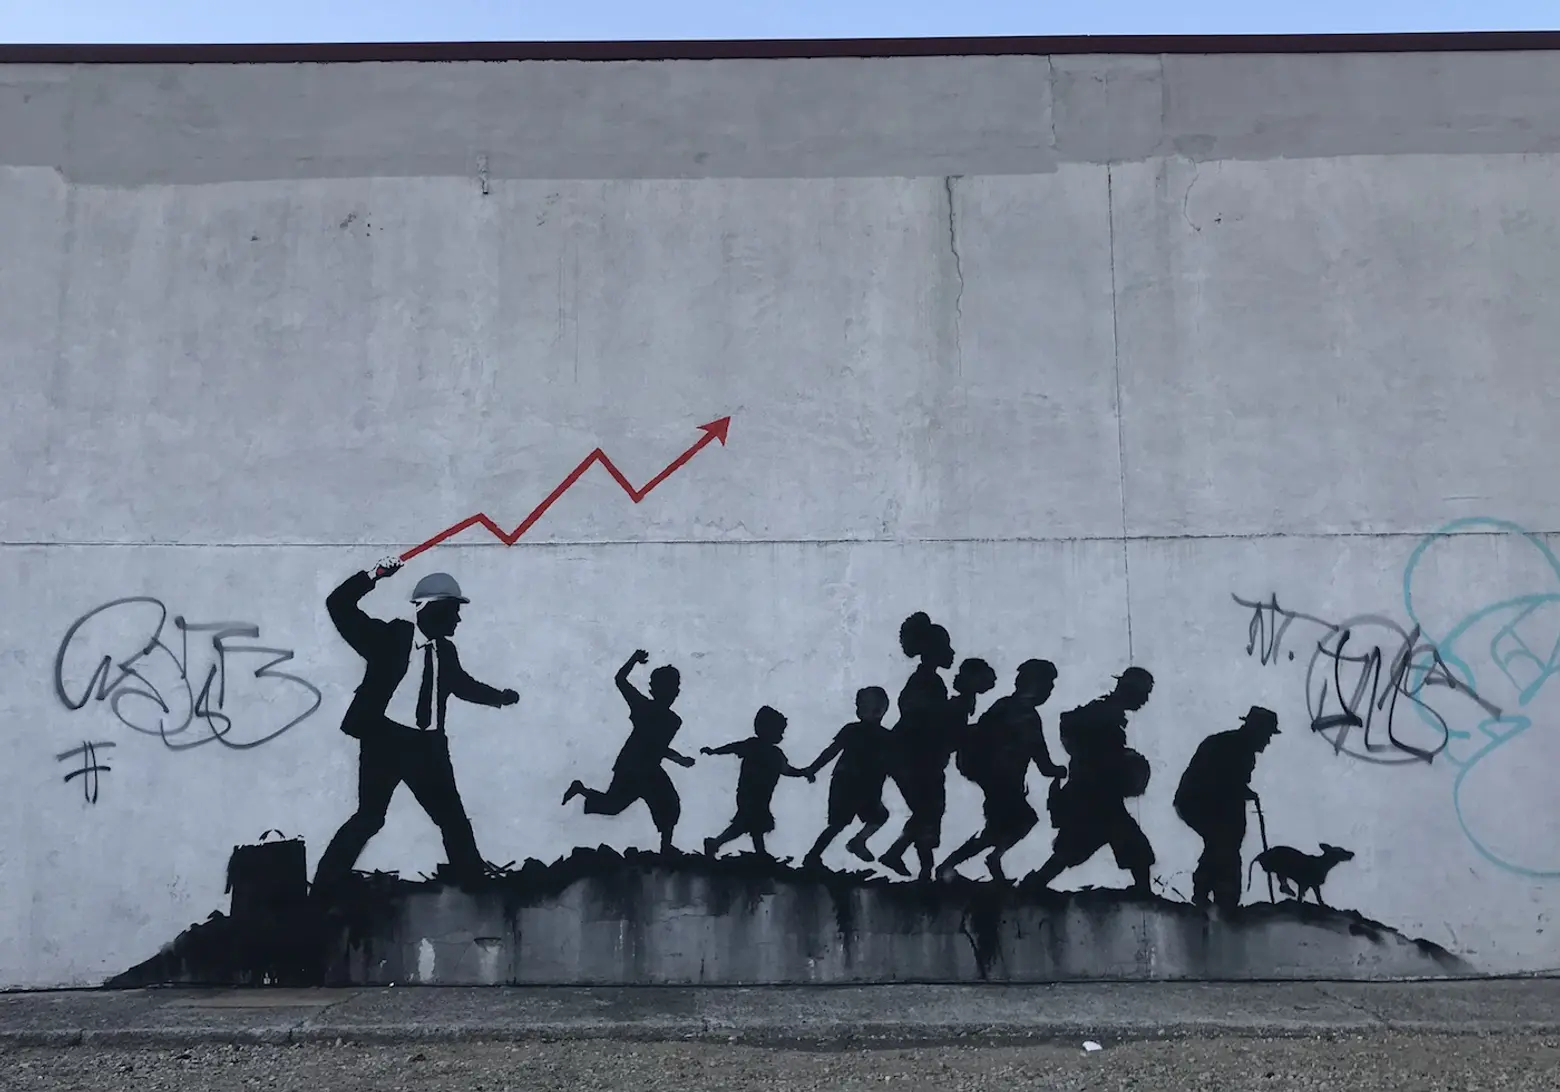 More Banksy work pops up in Brooklyn, this time commenting on capitalism and real estate